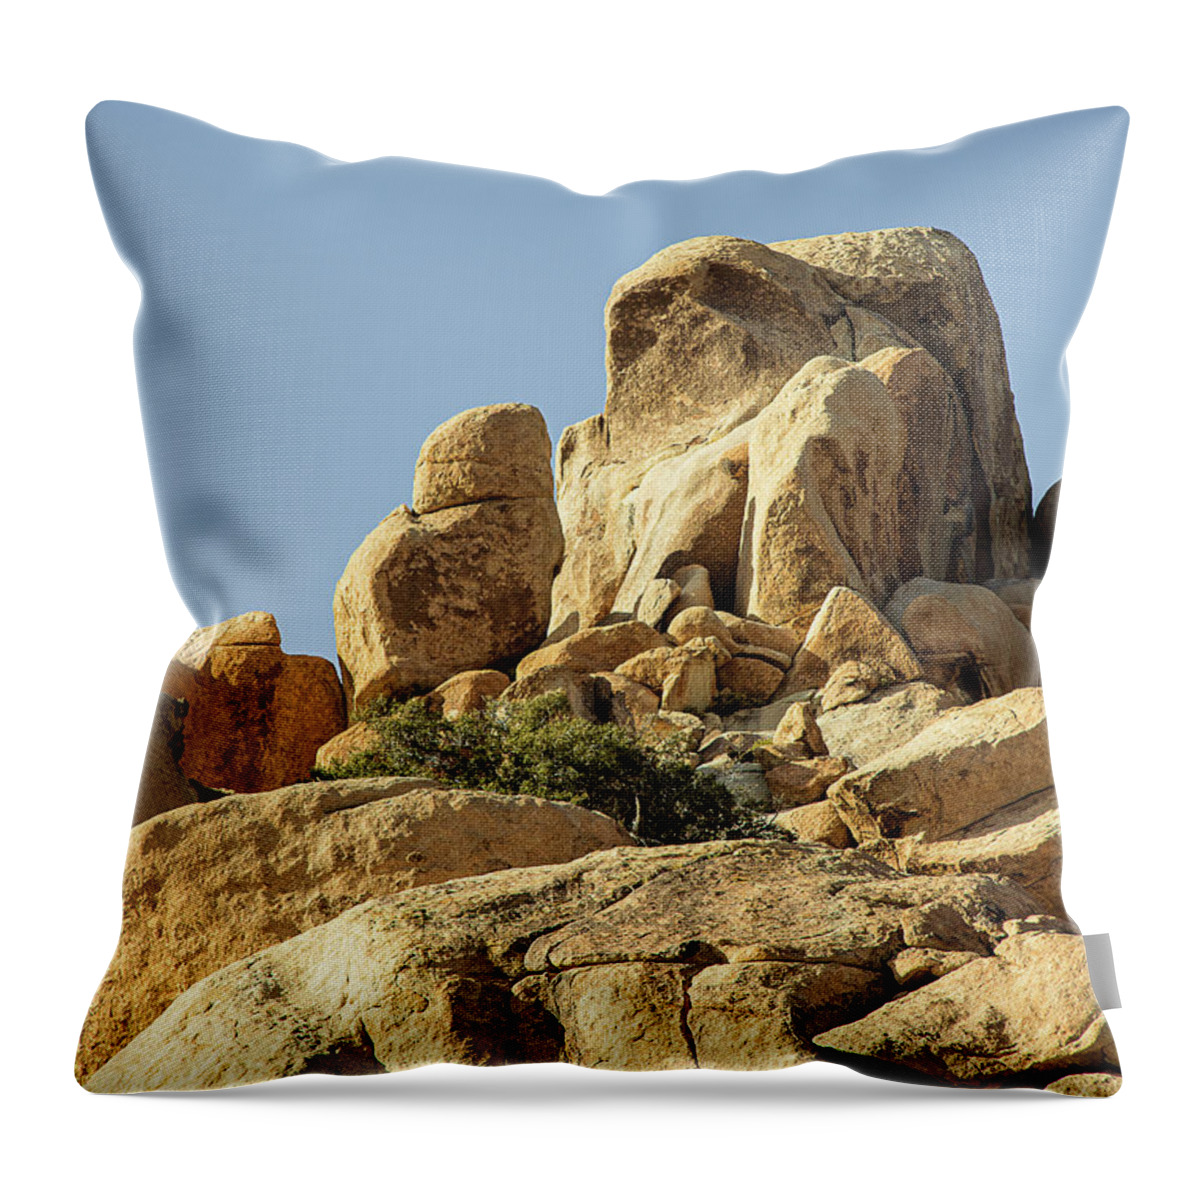 Landscapes Throw Pillow featuring the photograph Praying Monk by Claude Dalley